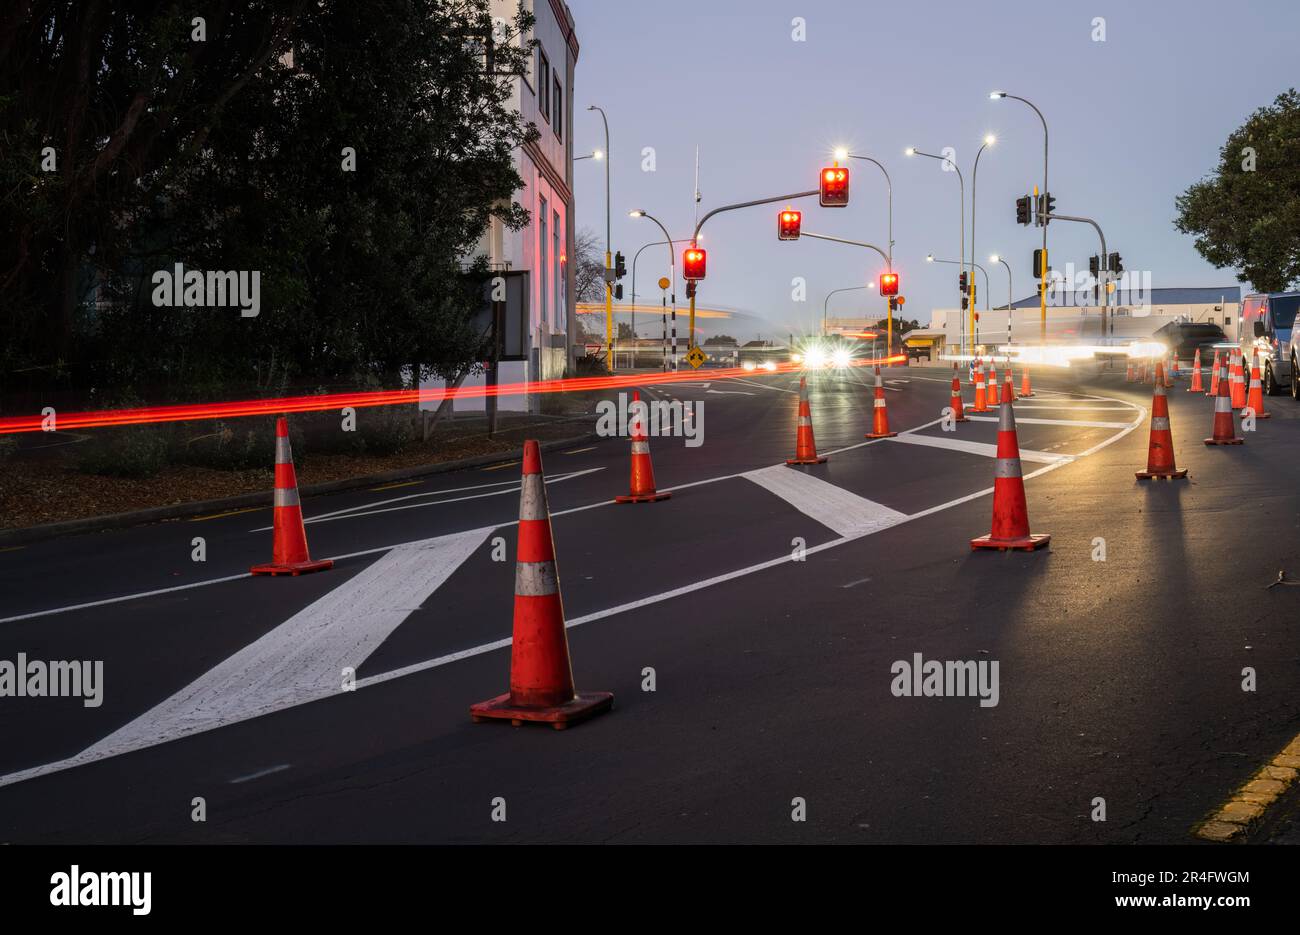 Orange traffic cones lined up on the road. Car light trails on the road intersection. Auckland. Stock Photo